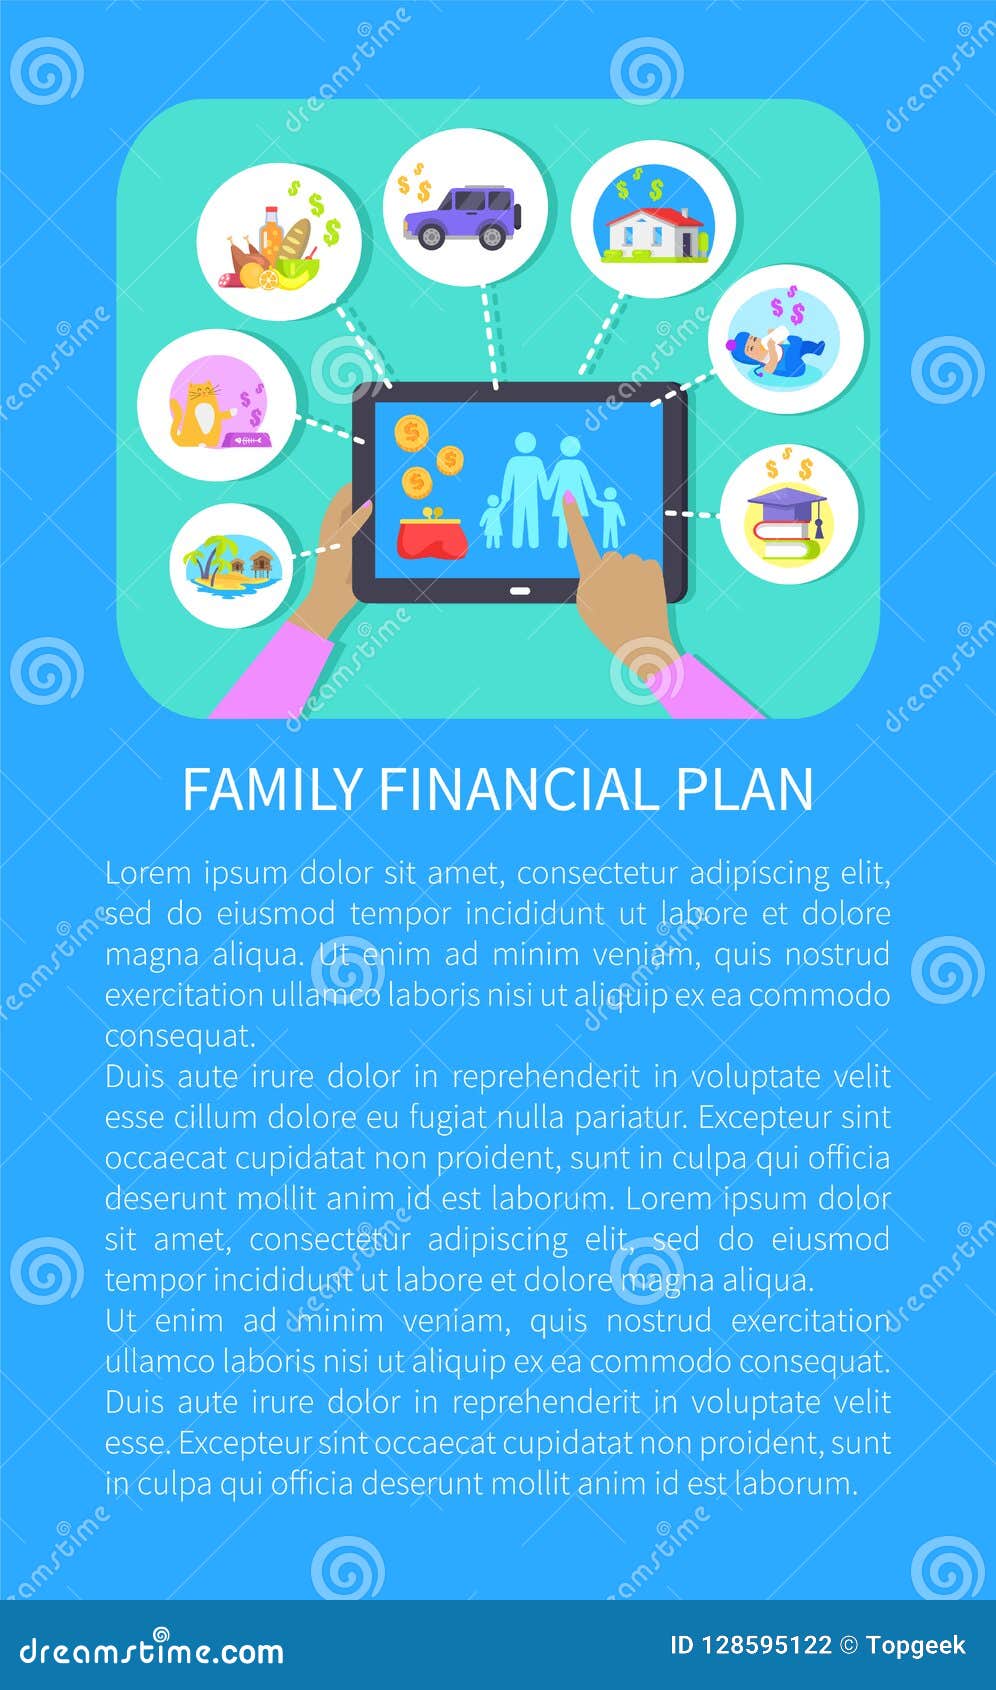 Download Family Financial Plan Tablet Vector Illustration Stock Vector - Illustration of finance, budget ...